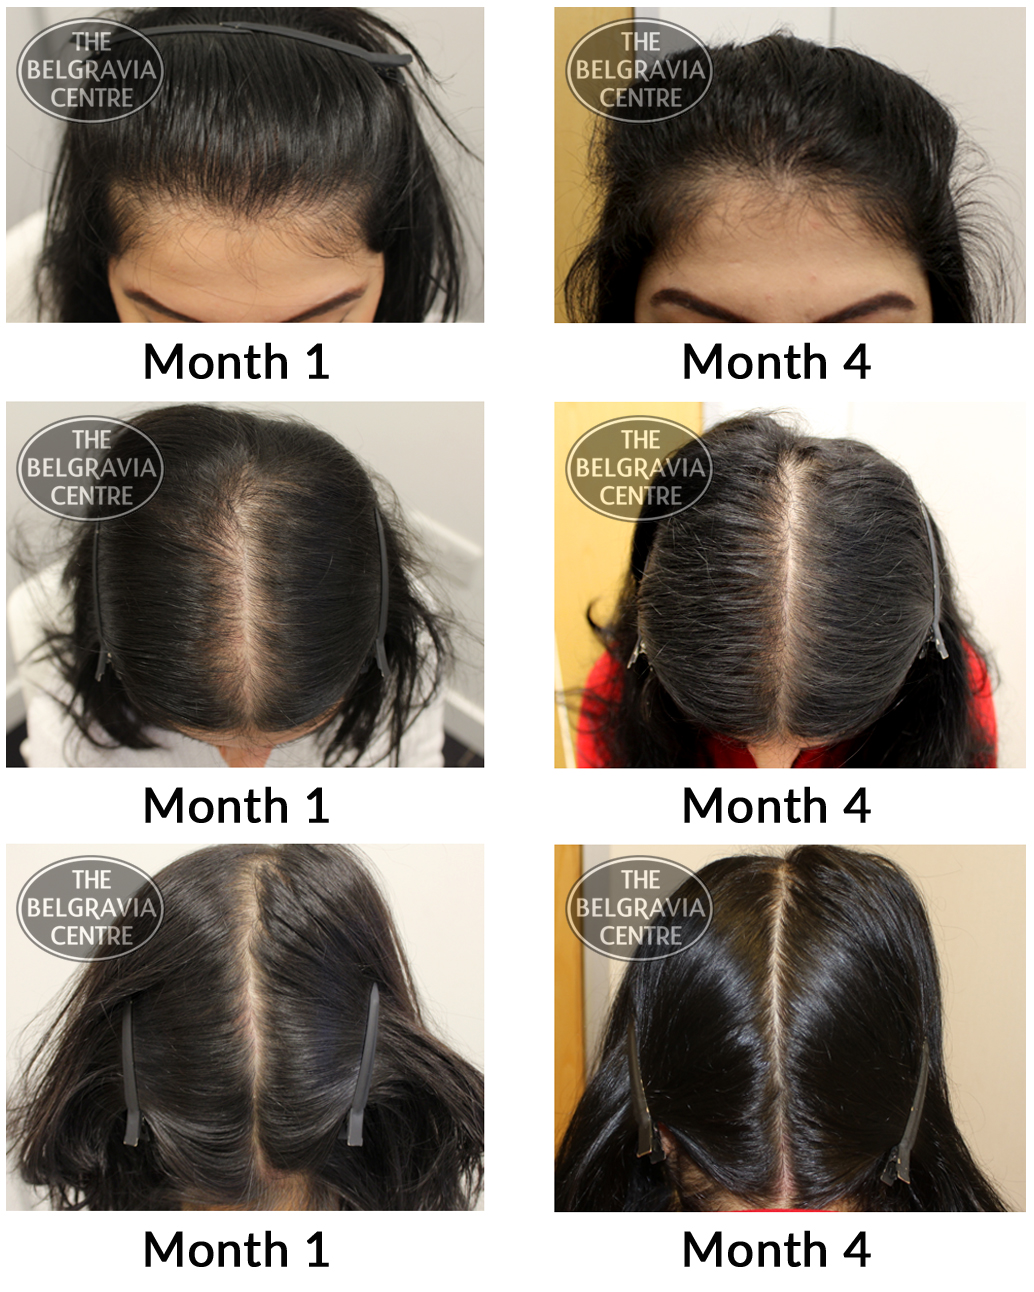 photoscans-belgravia-centre-patient-feedback-female-pattern-hair-loss-treatment-review-my241116